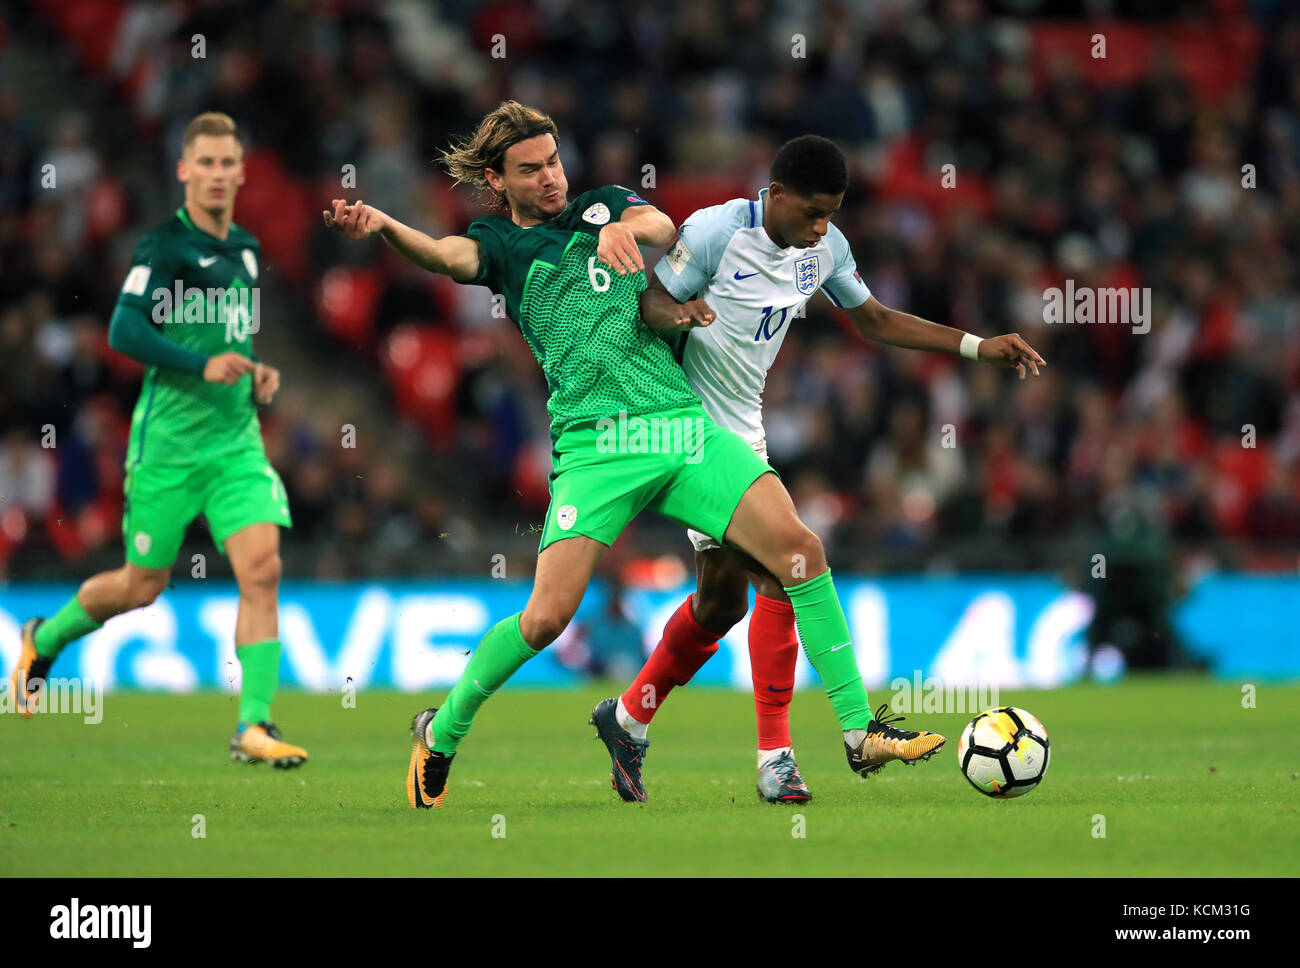 Slovenia's Rene Krhin (left) and England's Marcus Rashford (right) battle for the ball during the 2018 FIFA World Cup Qualifying, Group F match at Wembley Stadium, London. Stock Photo